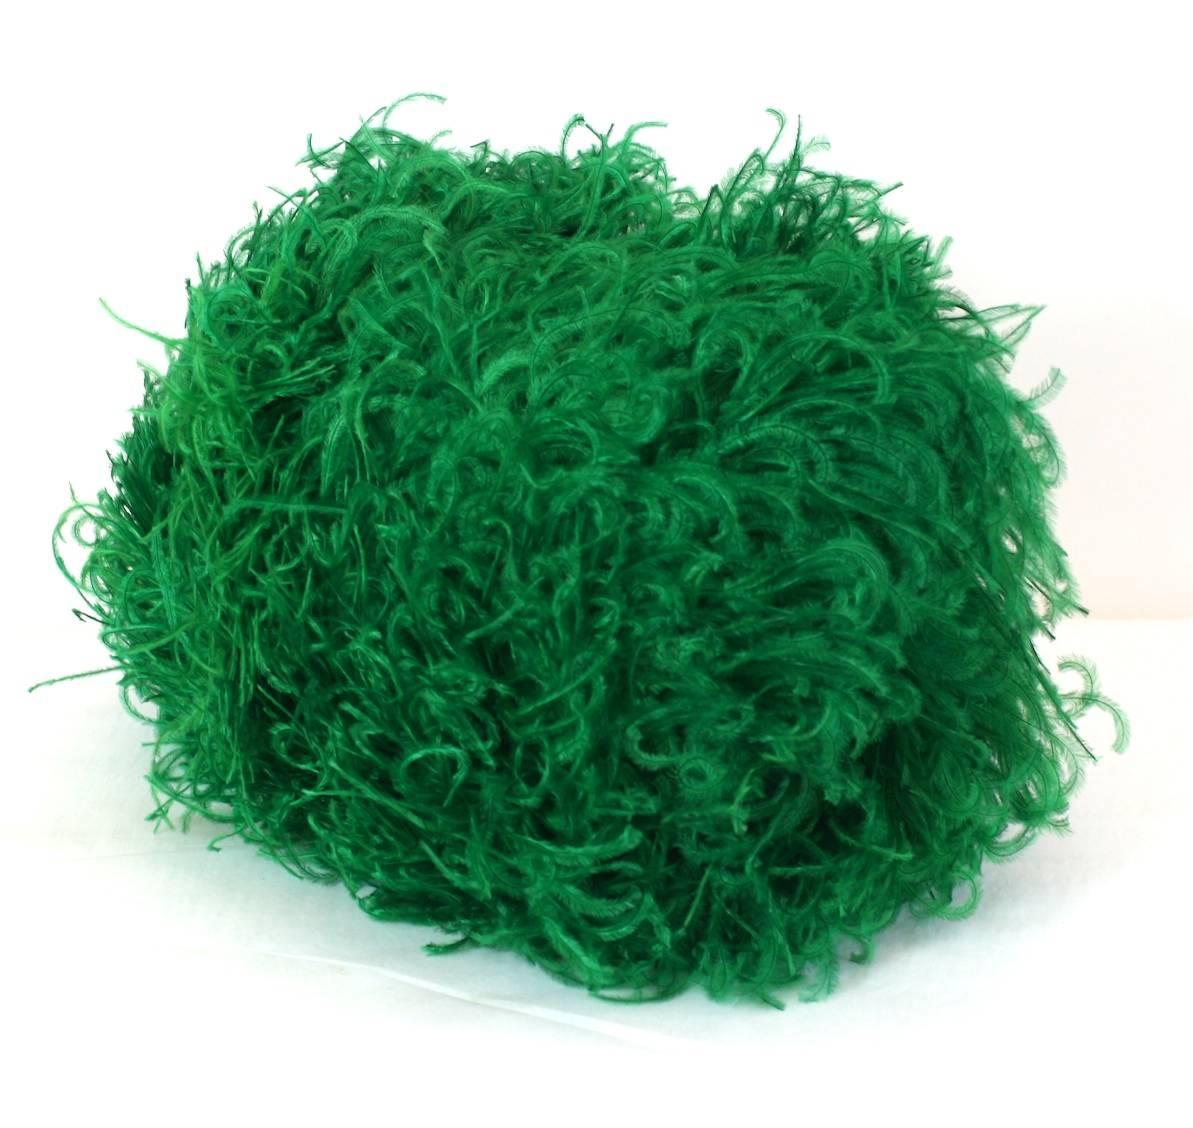 Vibrant Emerald Curled Ostrich Feather Muff from the Art Deco period. 1930's France. Excellent condition. 